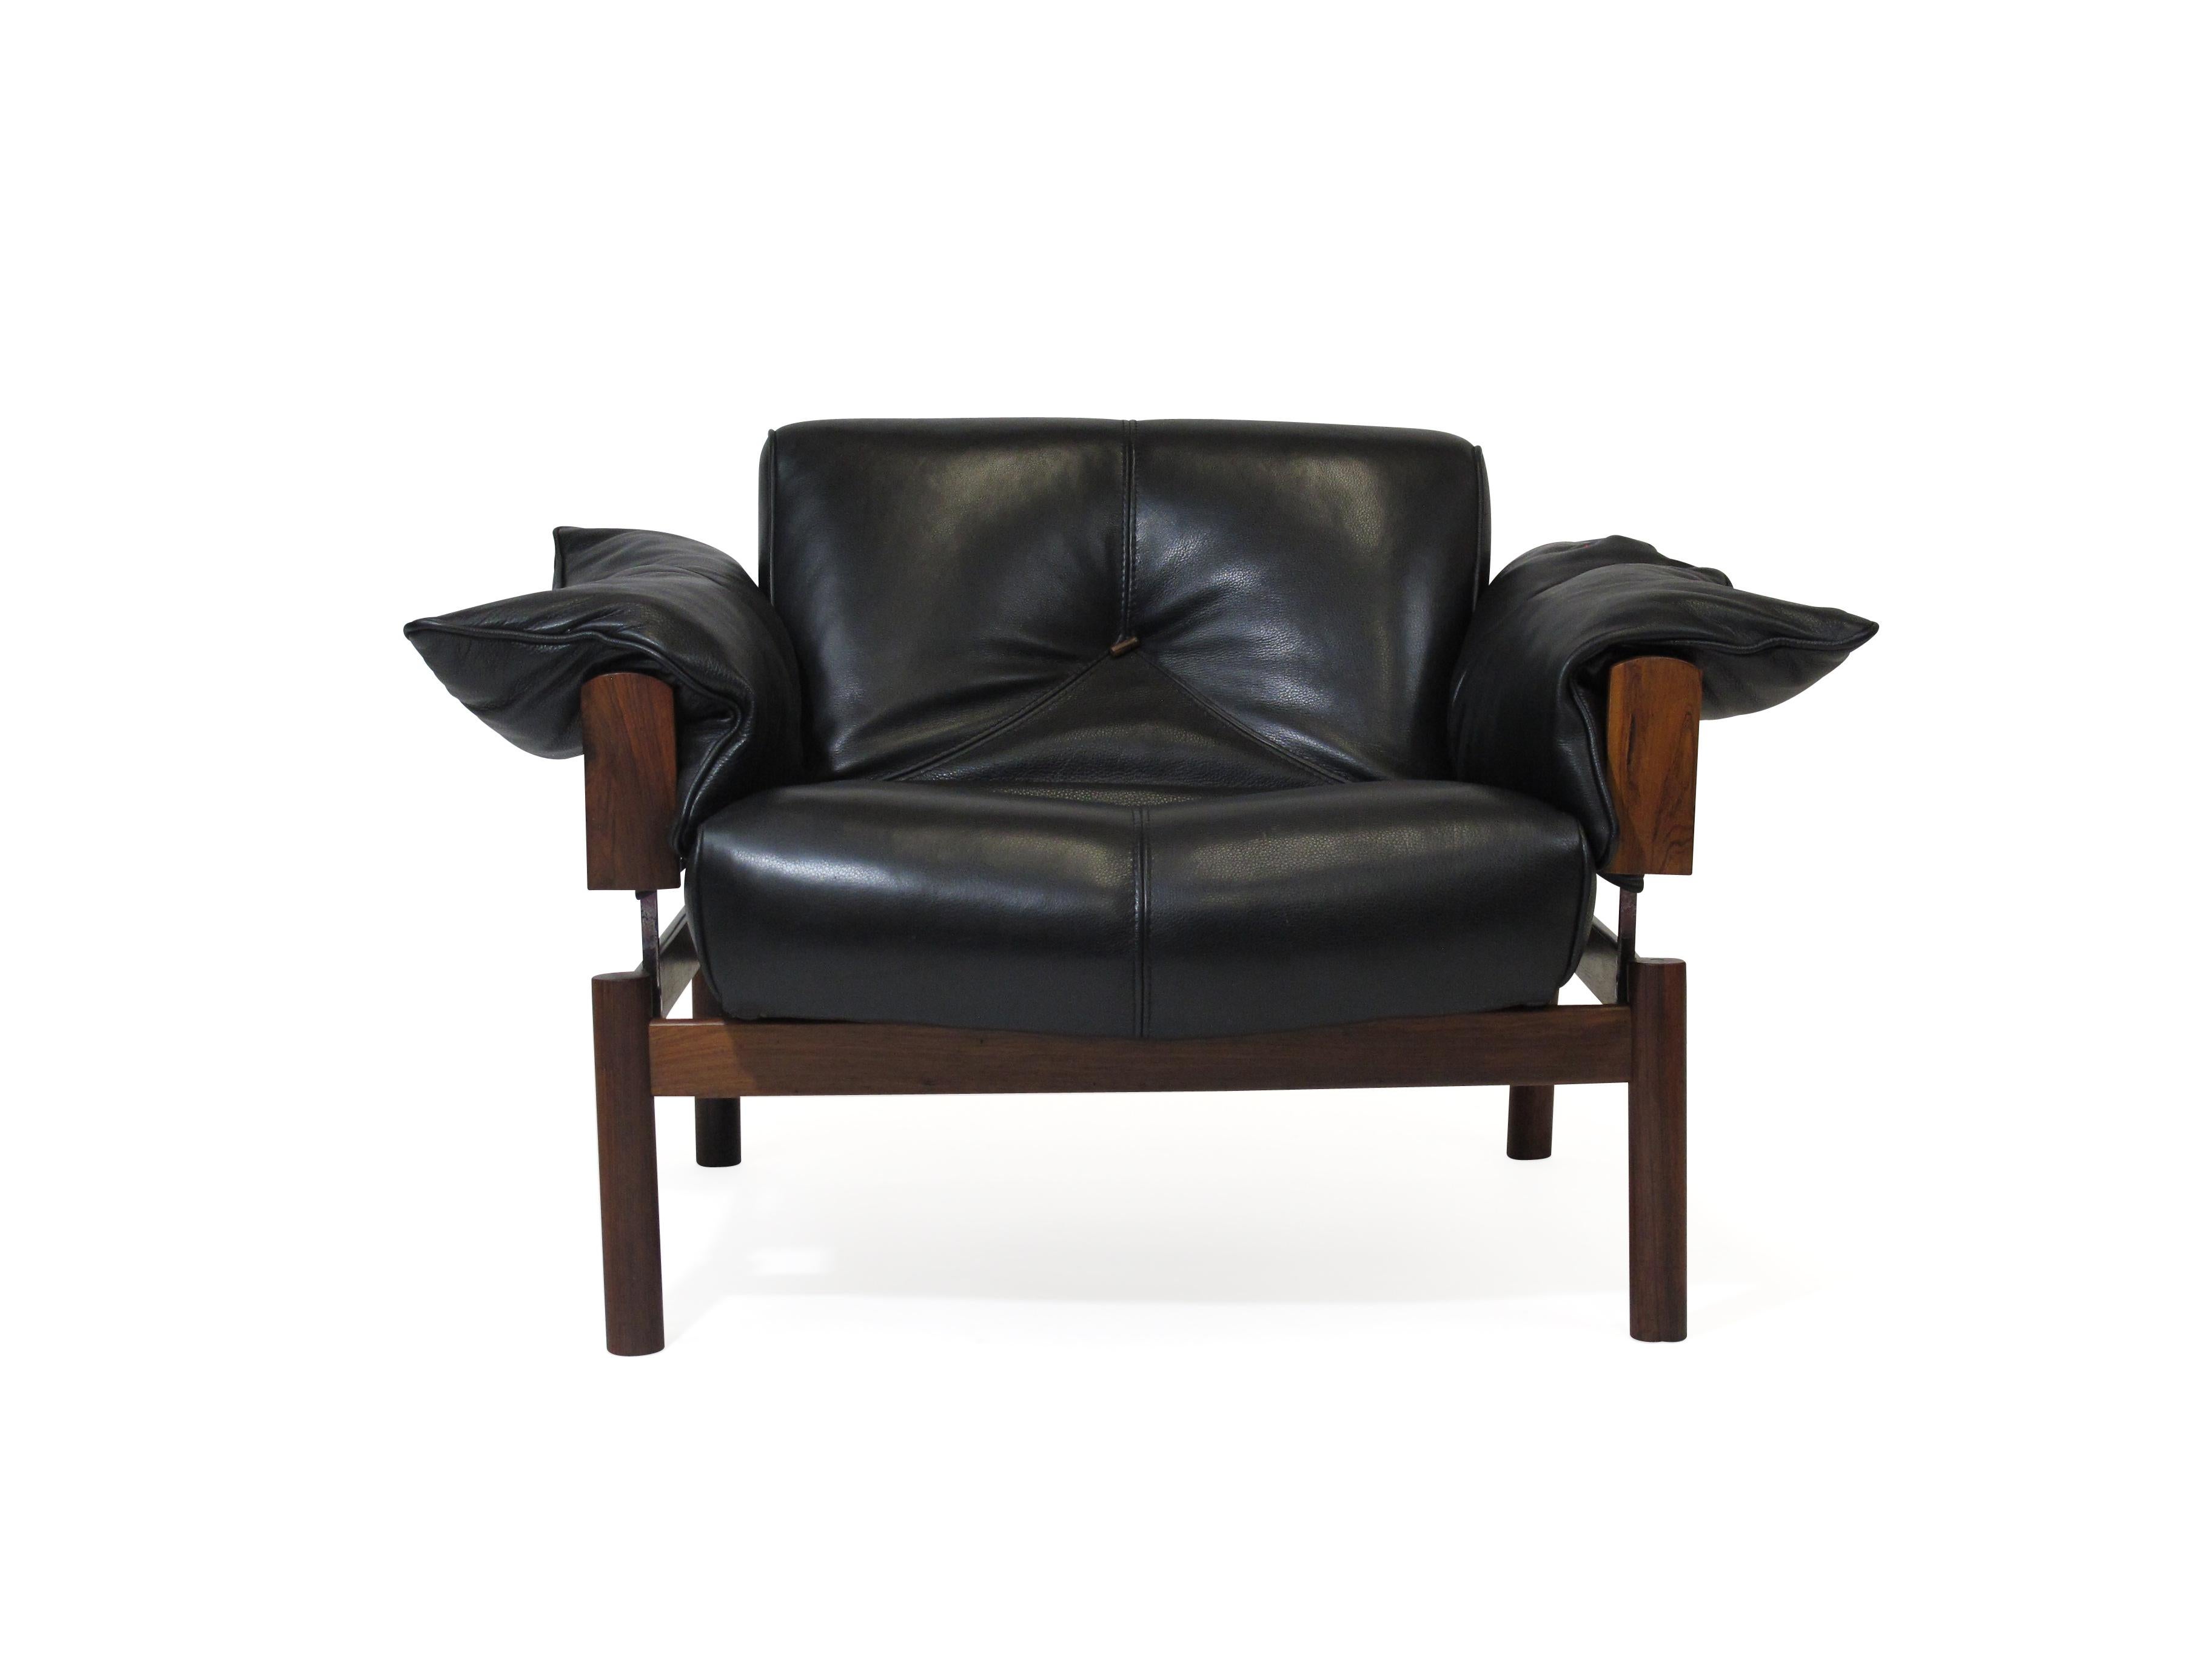 1960 Percival Lafer Brazilian Rosewood Sofa and Chair in Black Leather 9